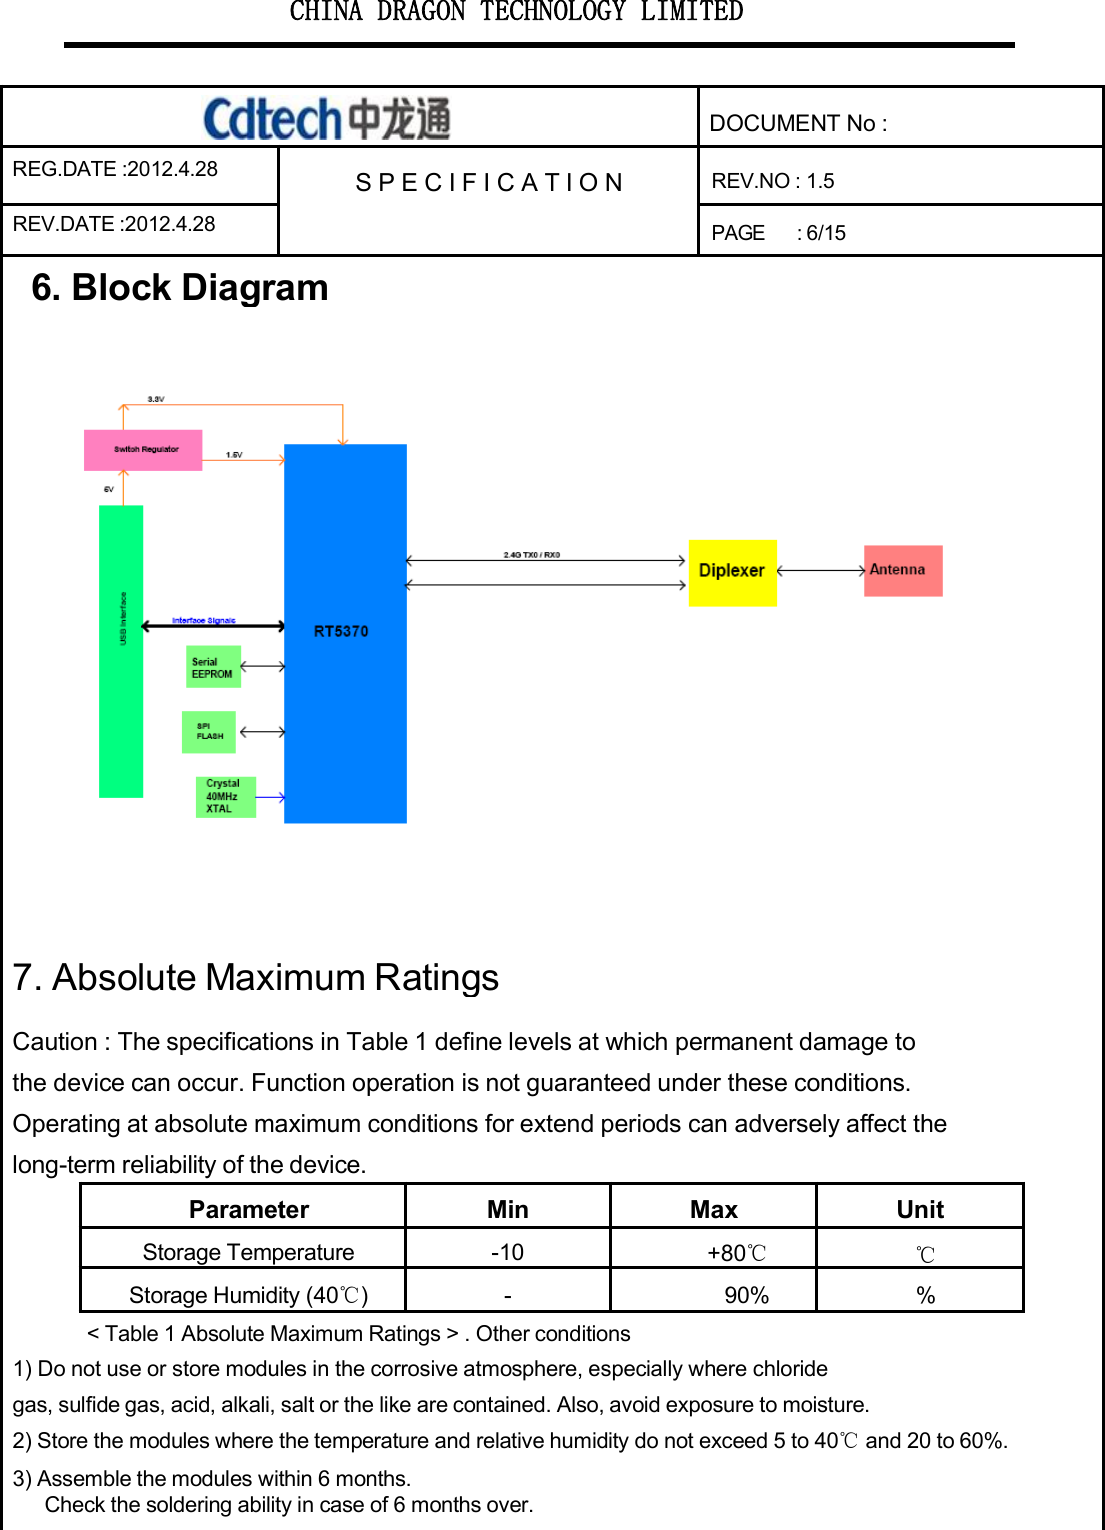 CHINA DRAGON TECHNOLOGY LIMITEDDOCUMENT No :REG.DATE :2012.4.28 S P E C I F I CAT I O N REV.NO : 1.5REV.DATE :2012.4.28PAGE :6/156. BlockDiagram7. Absolute MaximumRatingsCaution : The specifications in Table 1 define levels at which permanent damage tothe device can occur. Function operation is not guaranteed under these conditions.Operating at absolute maximum conditions for extend periods can adversely affect thelong-term reliability of the device.Parameter Min Max UnitStorage Temperature -10 +80℃℃Storage Humidity (40℃) - 90% %&lt; Table 1 Absolute Maximum Ratings &gt; . Other conditions1) Do not use or store modules in the corrosive atmosphere, especially where chloridegas, sulfide gas, acid, alkali, salt or the like are contained. Also, avoid exposure to moisture.2) Store the modules where the temperature and relative humidity do not exceed 5 to 40℃and 20 to 60%.3) Assemble the modules within 6 months.Check the soldering ability in case of 6 months over.